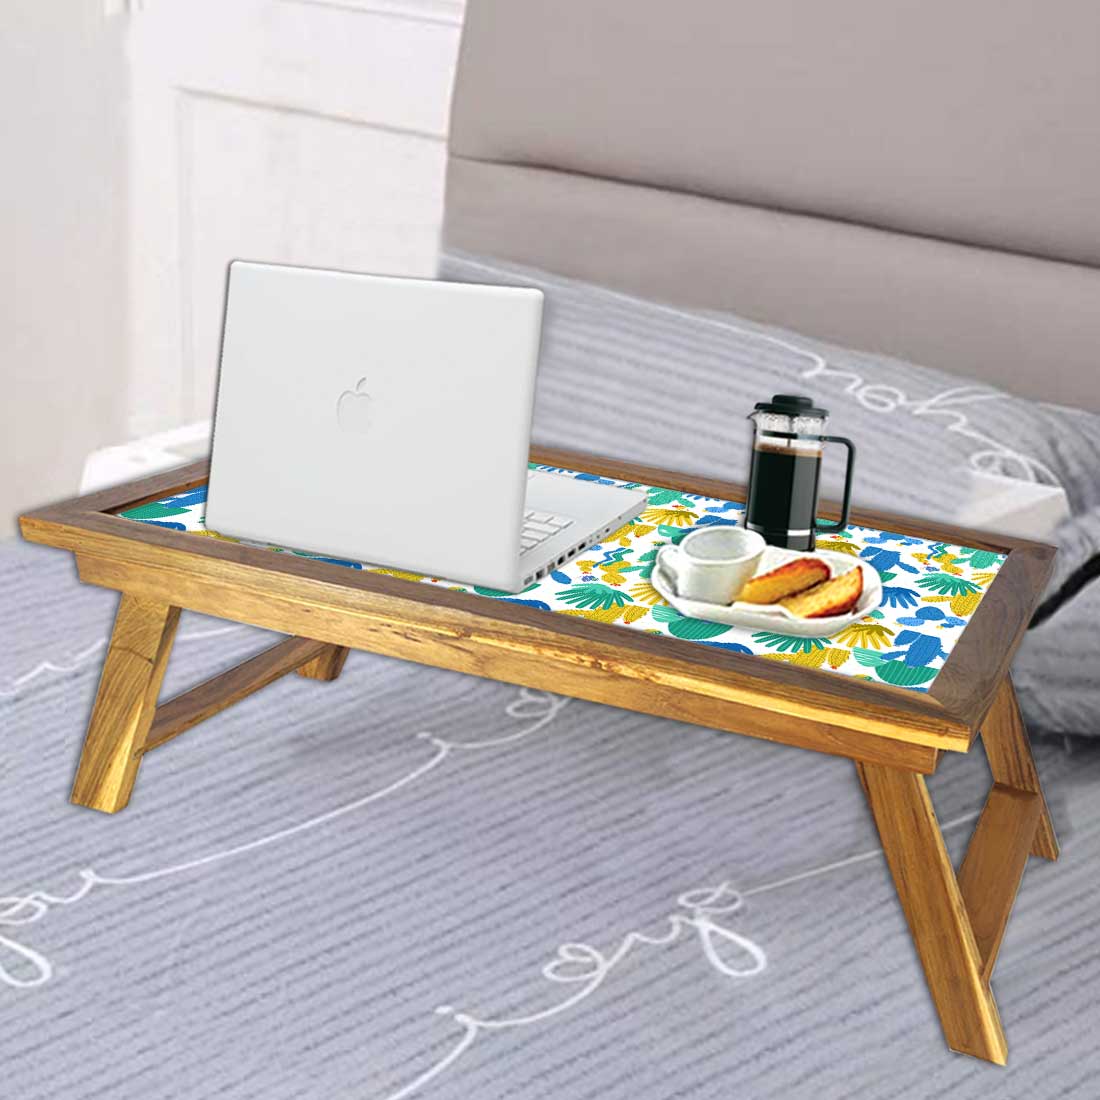 Folding Laptop Table for Home Bed Breakfast Tables Wooden Study Desk - Cactus Nutcase